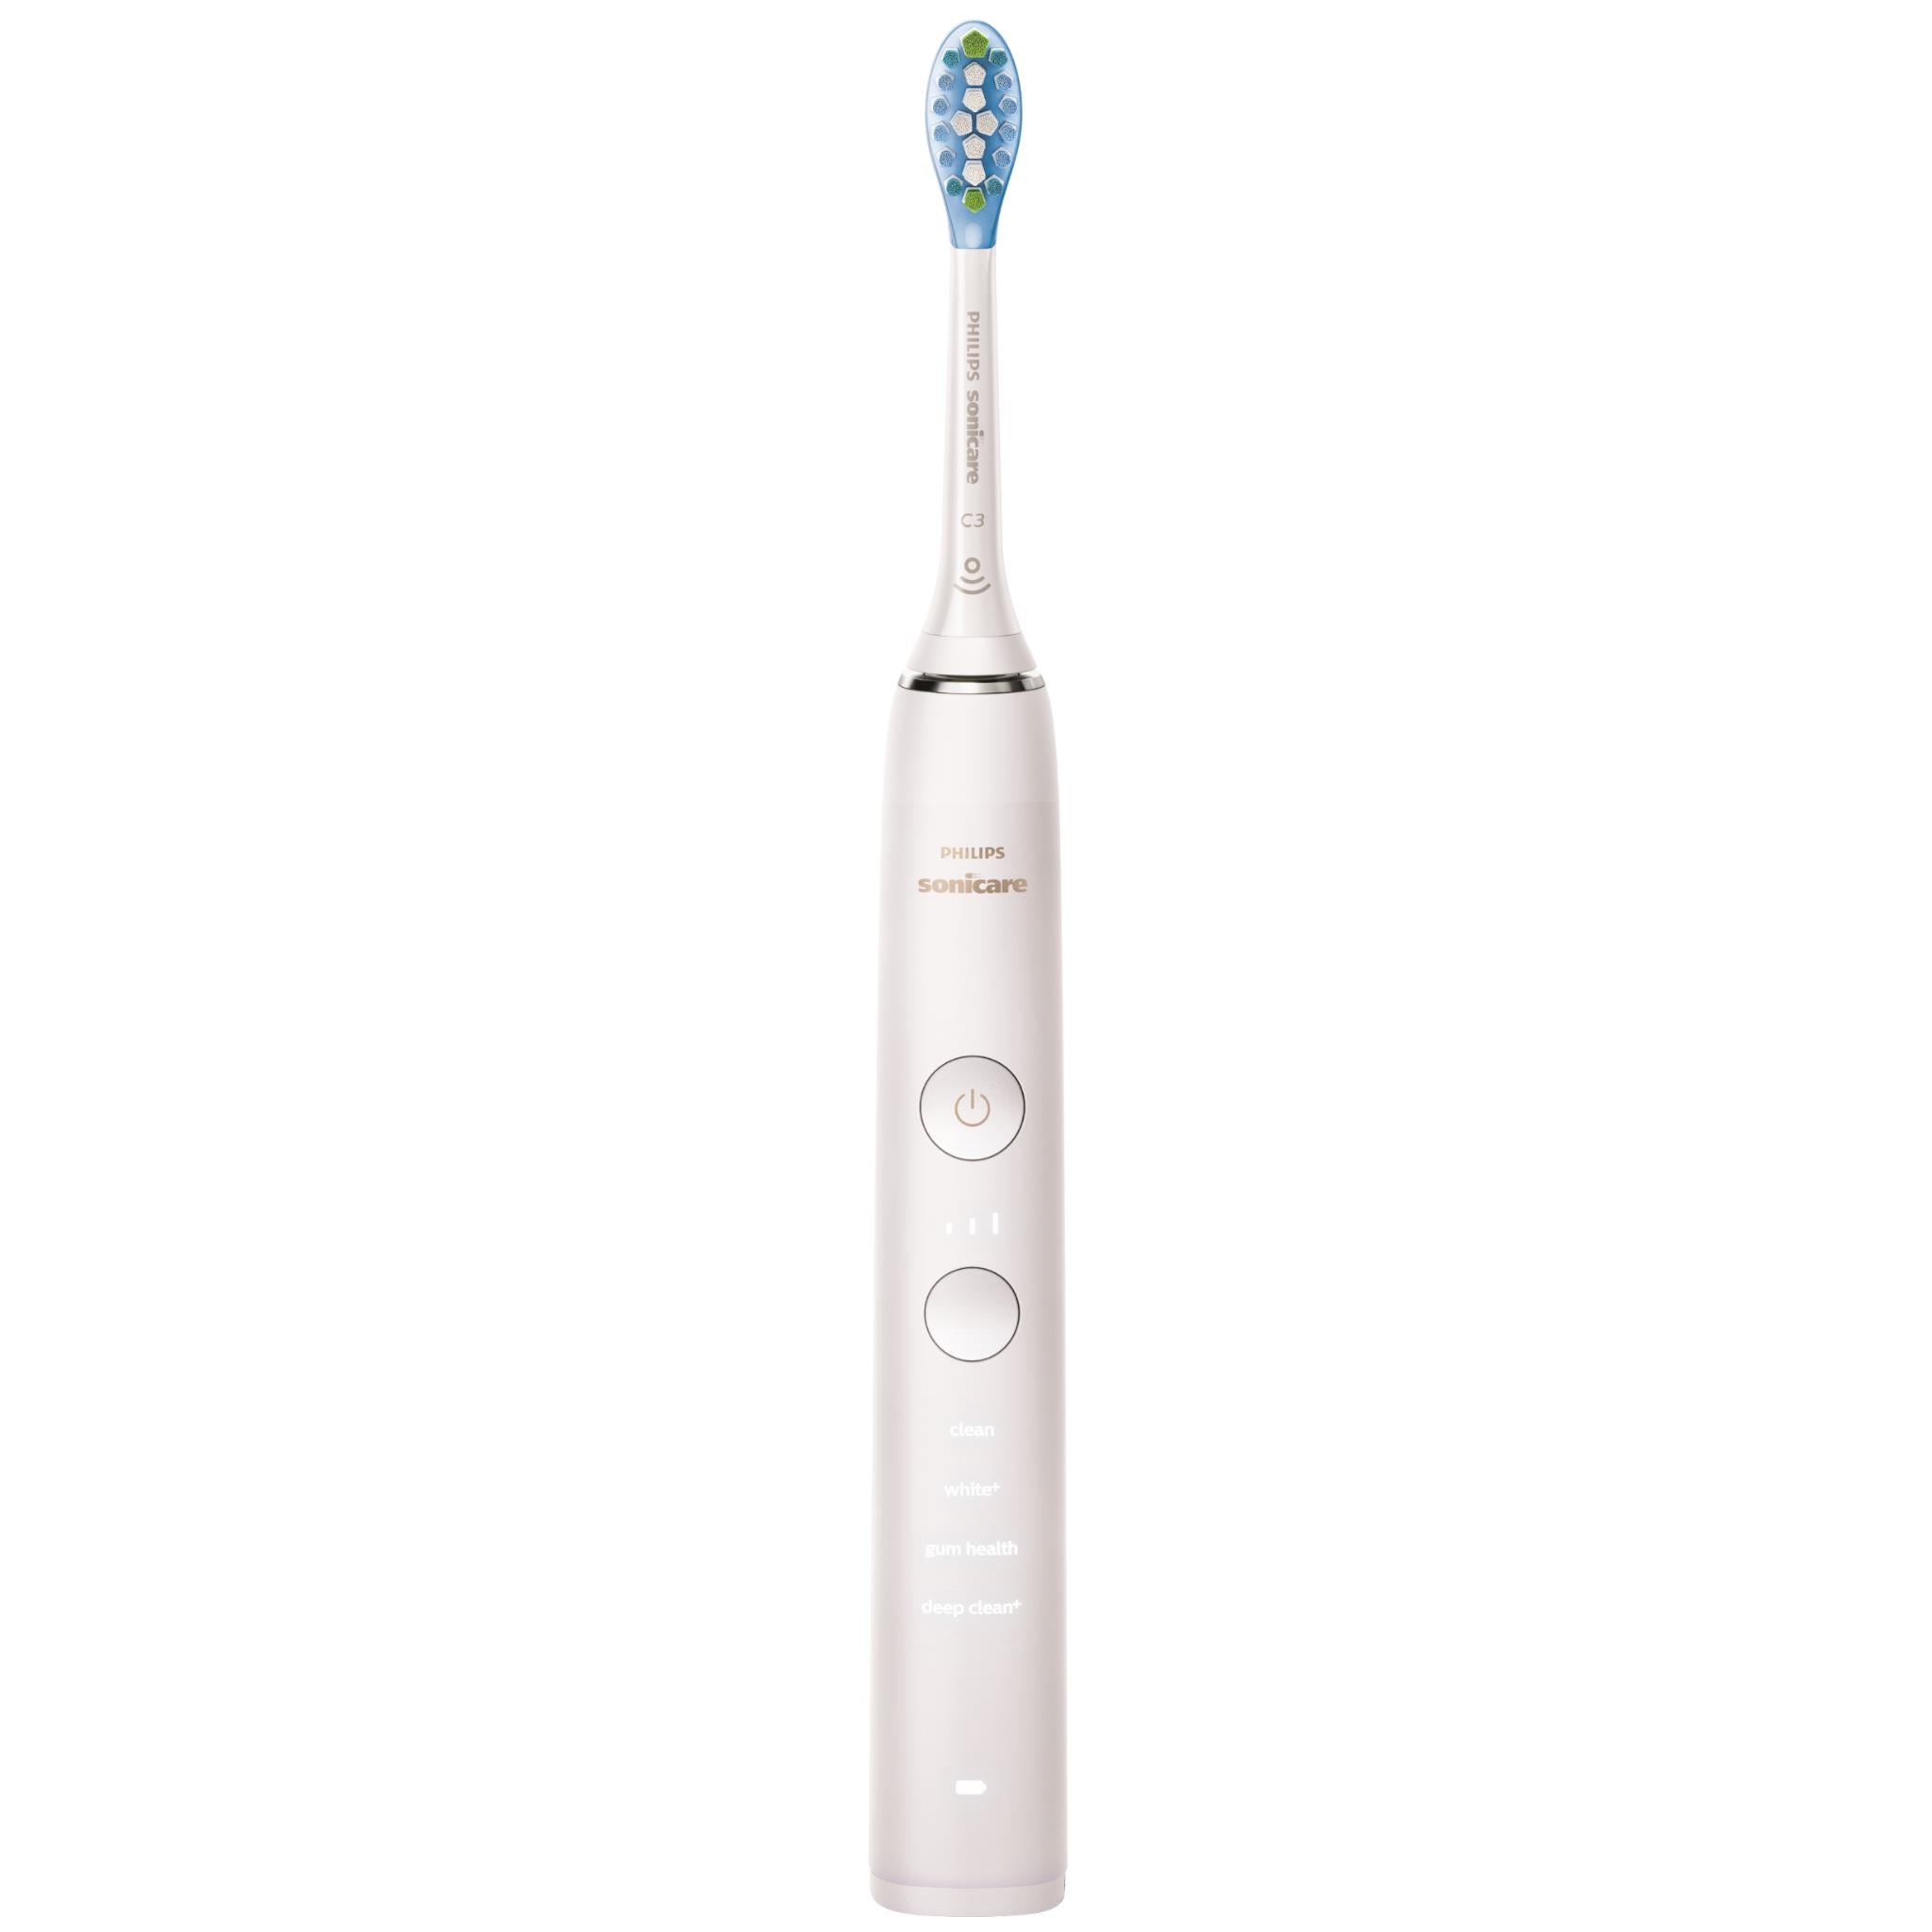 philips sonicare diamondclean 9000 electric toothbrush